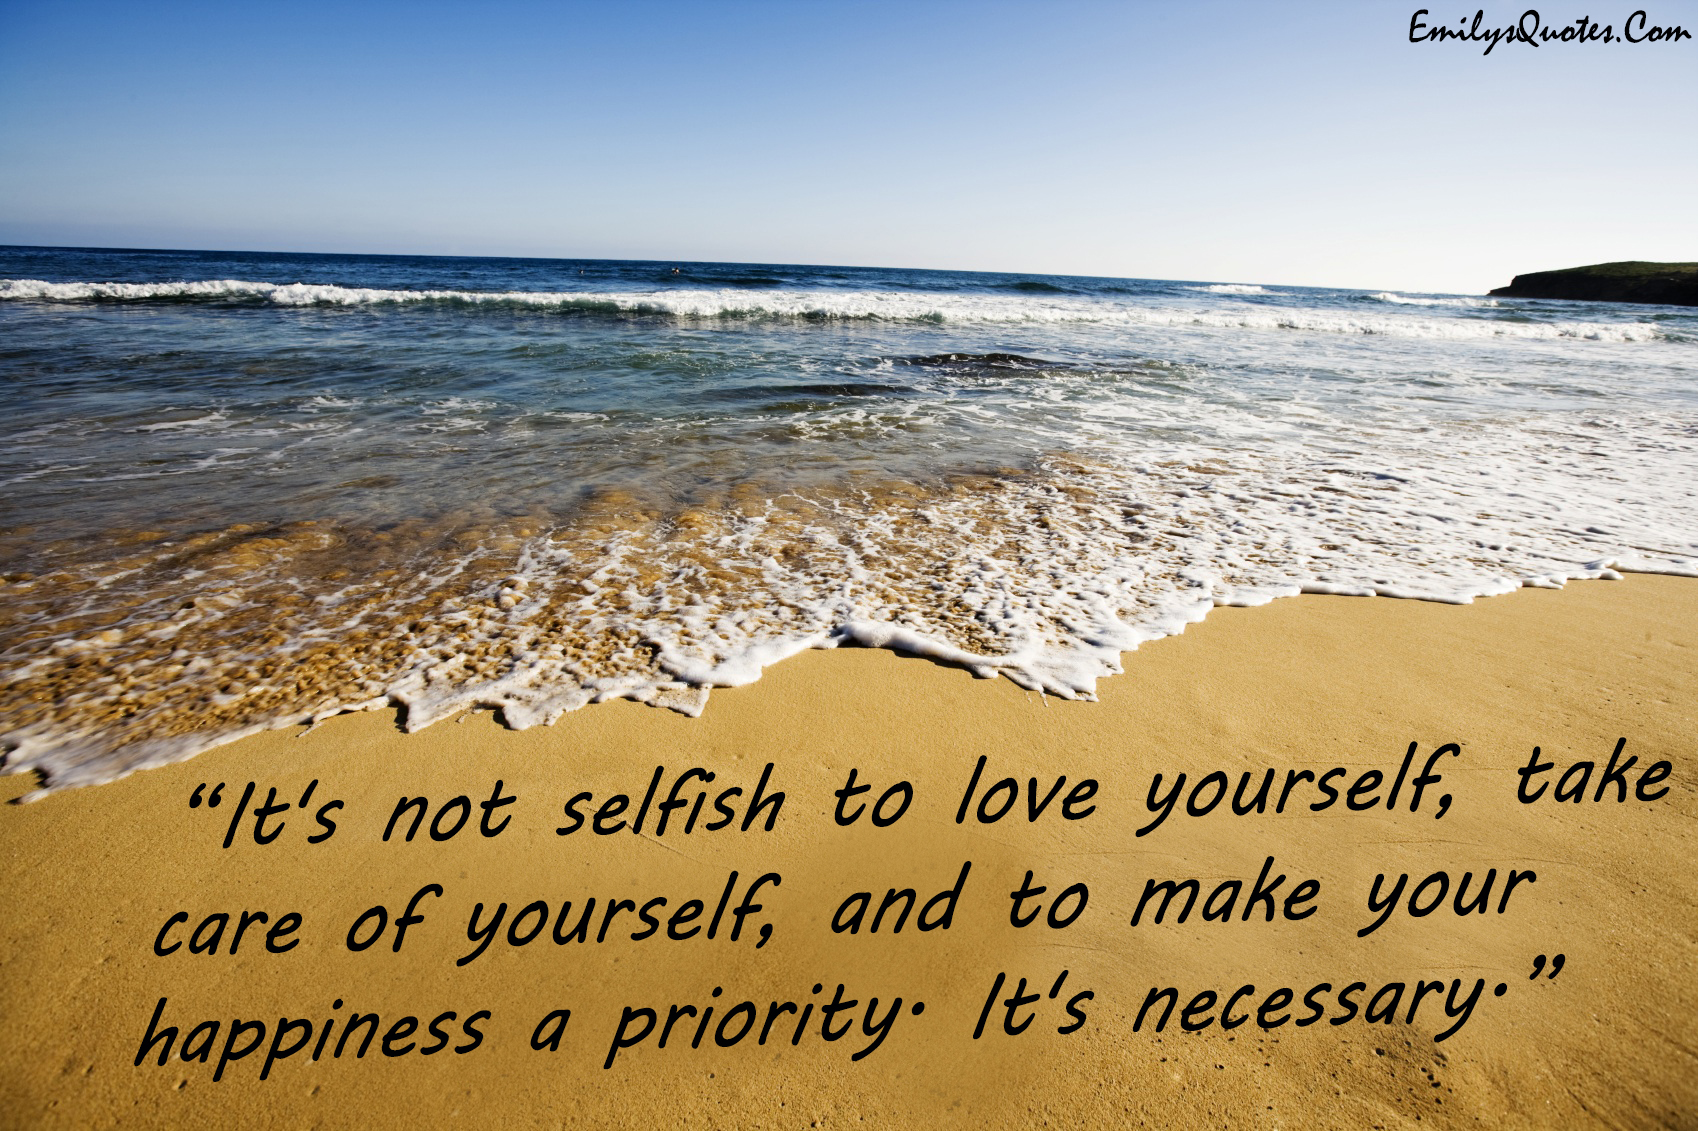 It’s not selfish to love yourself, take care of yourself, and to make your happiness a priority. It’s necessary